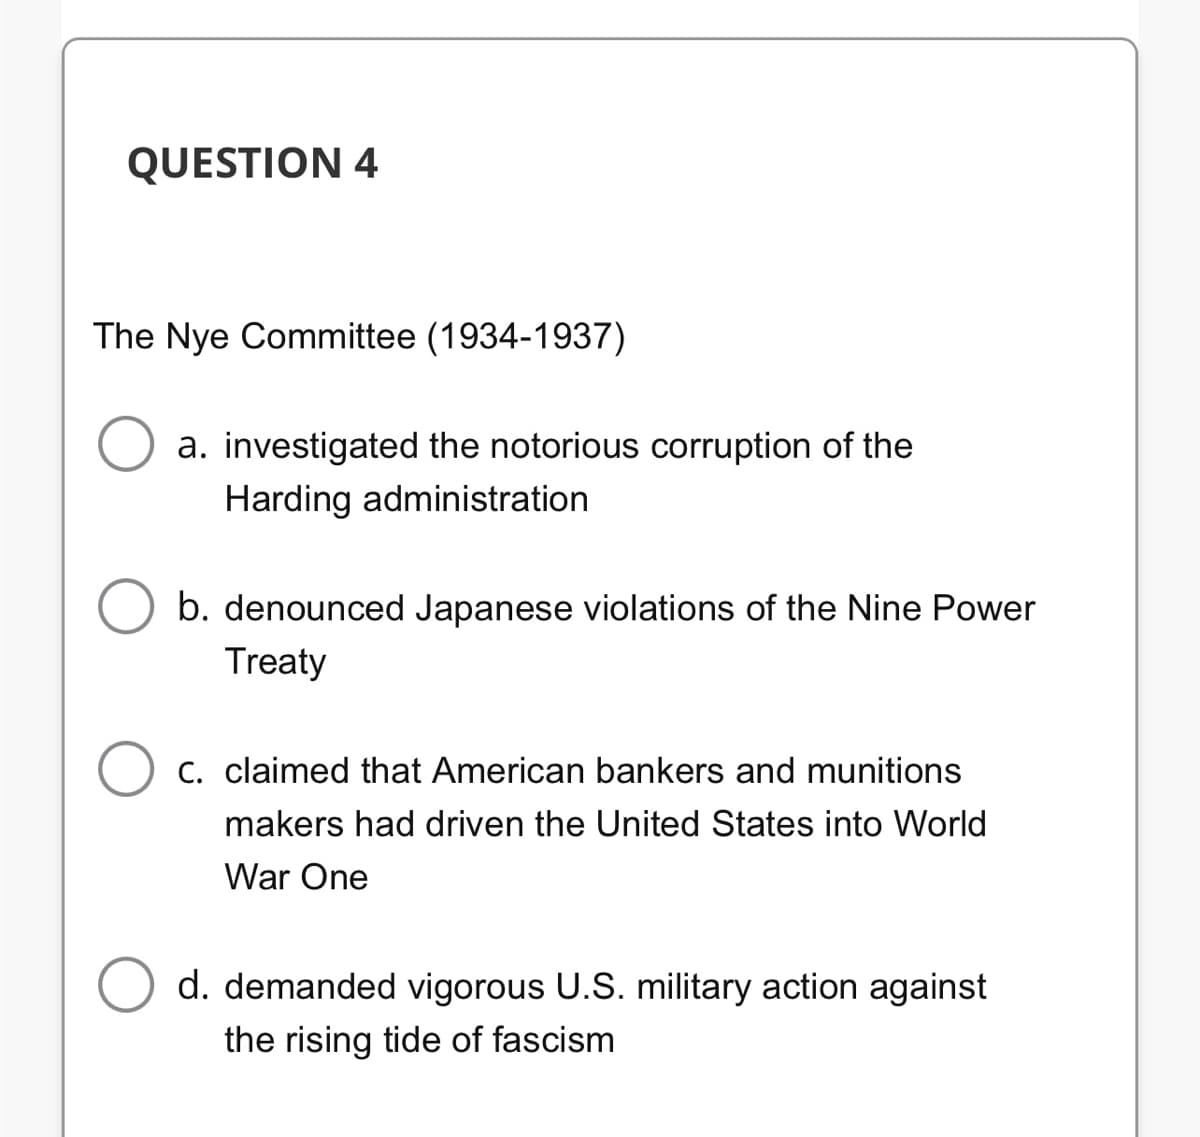 QUESTION 4
The Nye Committee (1934-1937)
a. investigated the notorious corruption of the
Harding administration
b. denounced Japanese violations of the Nine Power
Treaty
C. claimed that American bankers and munitions
makers had driven the United States into World
War One
d. demanded vigorous U.S. military action against
the rising tide of fascism
